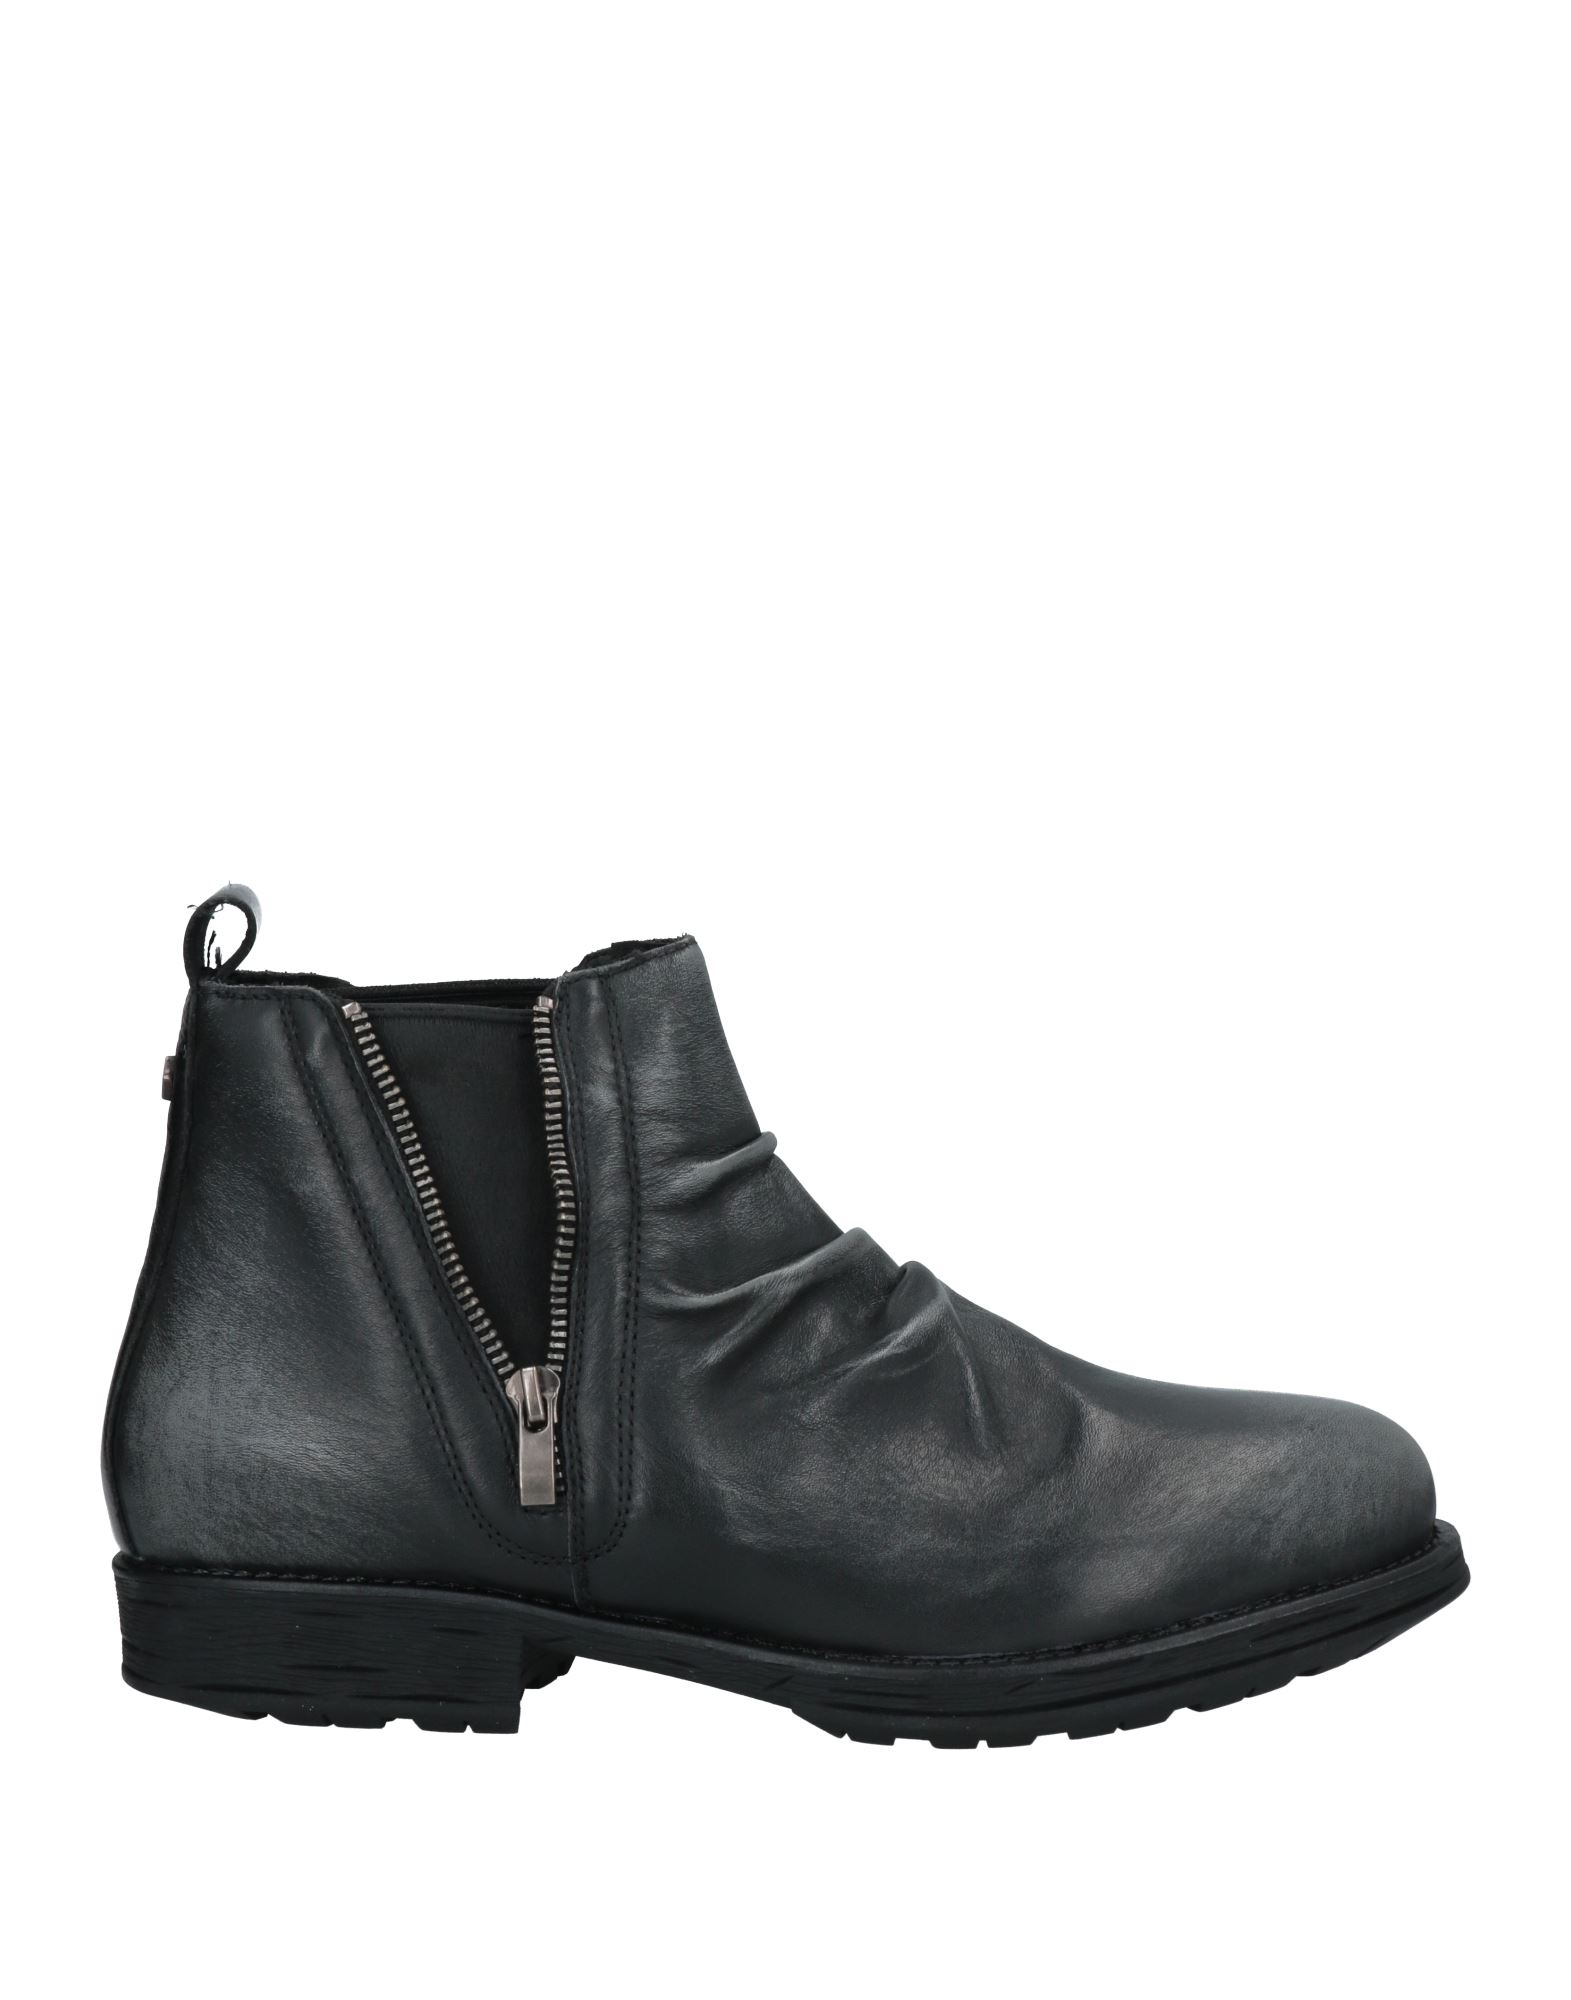 Cult Ankle Boots In Steel Grey | ModeSens